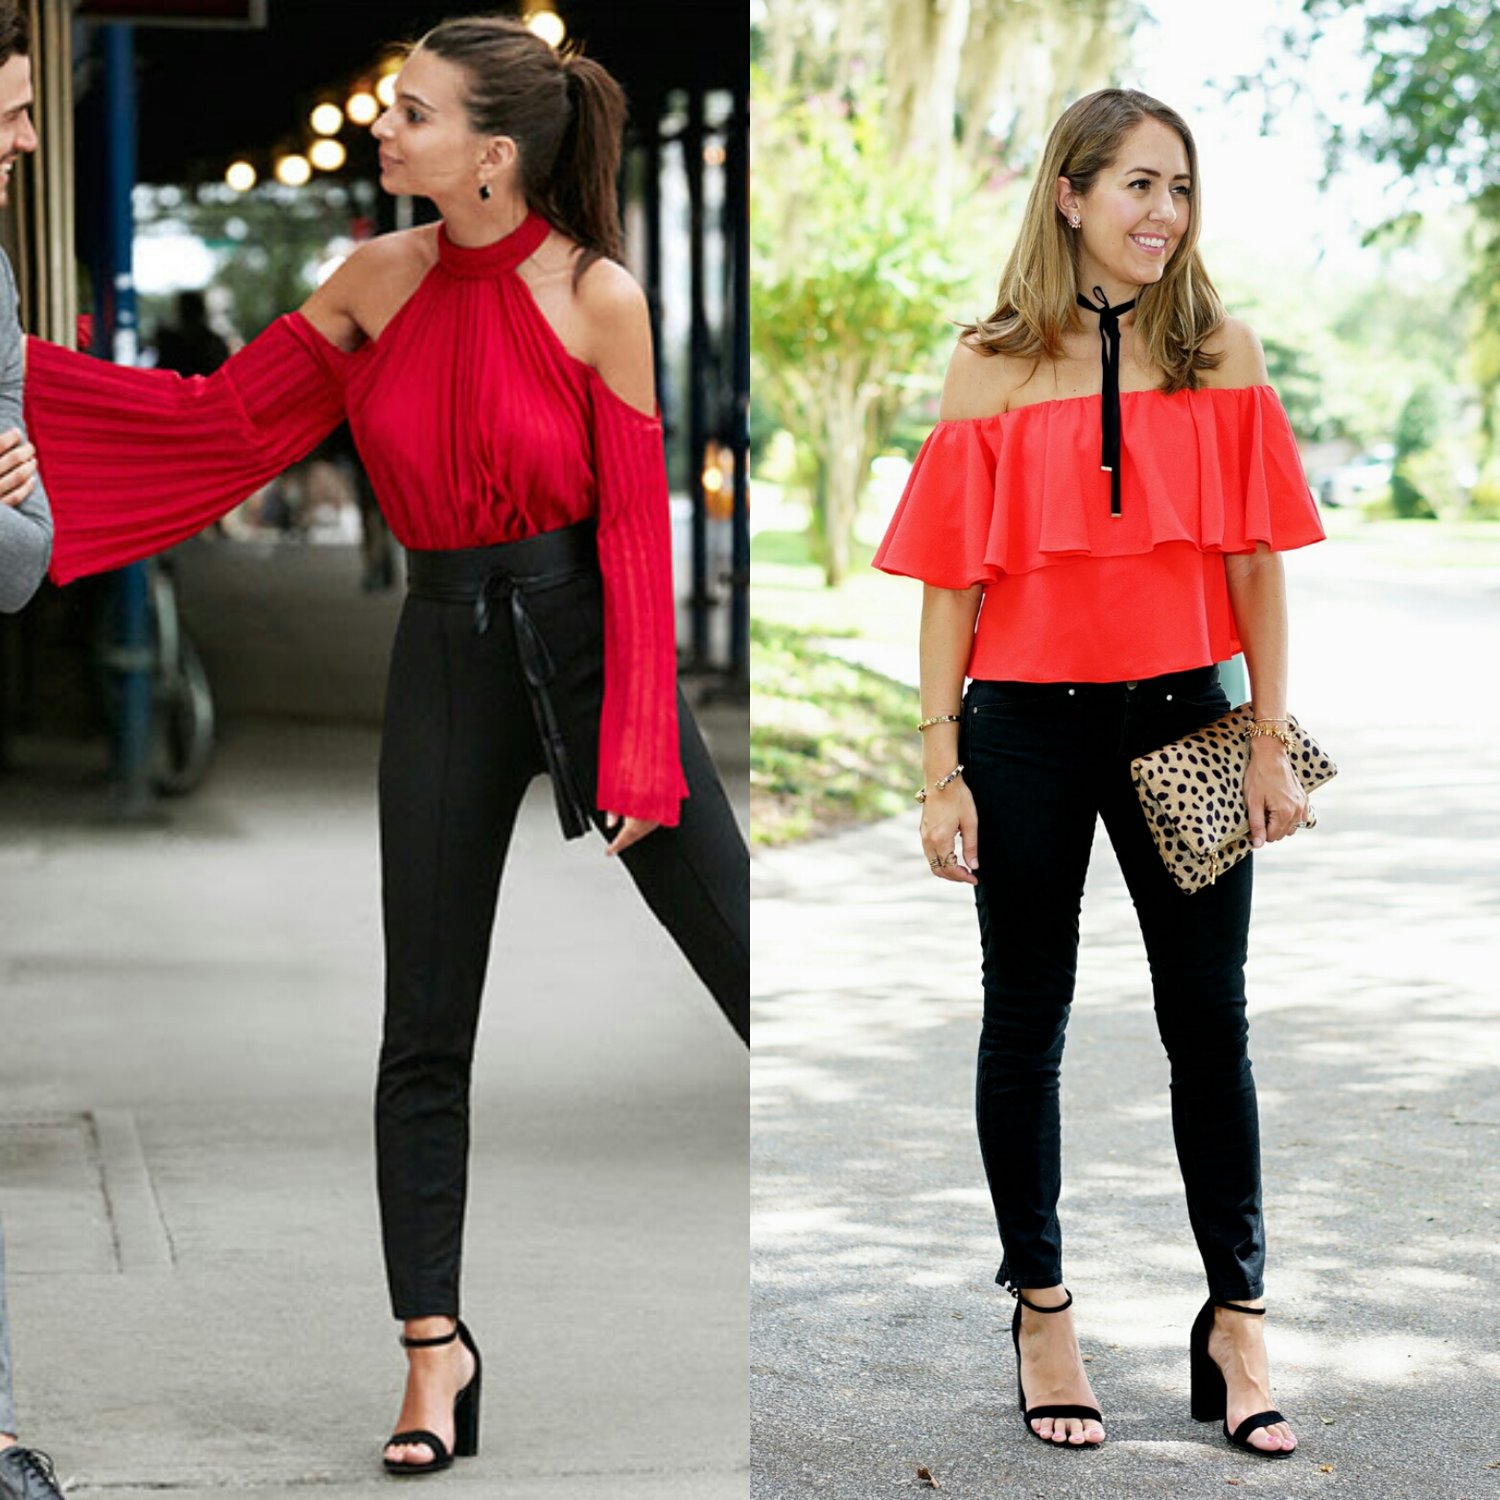 Today's Everyday Fashion: Red, Black, Leopard — J's Everyday Fashion